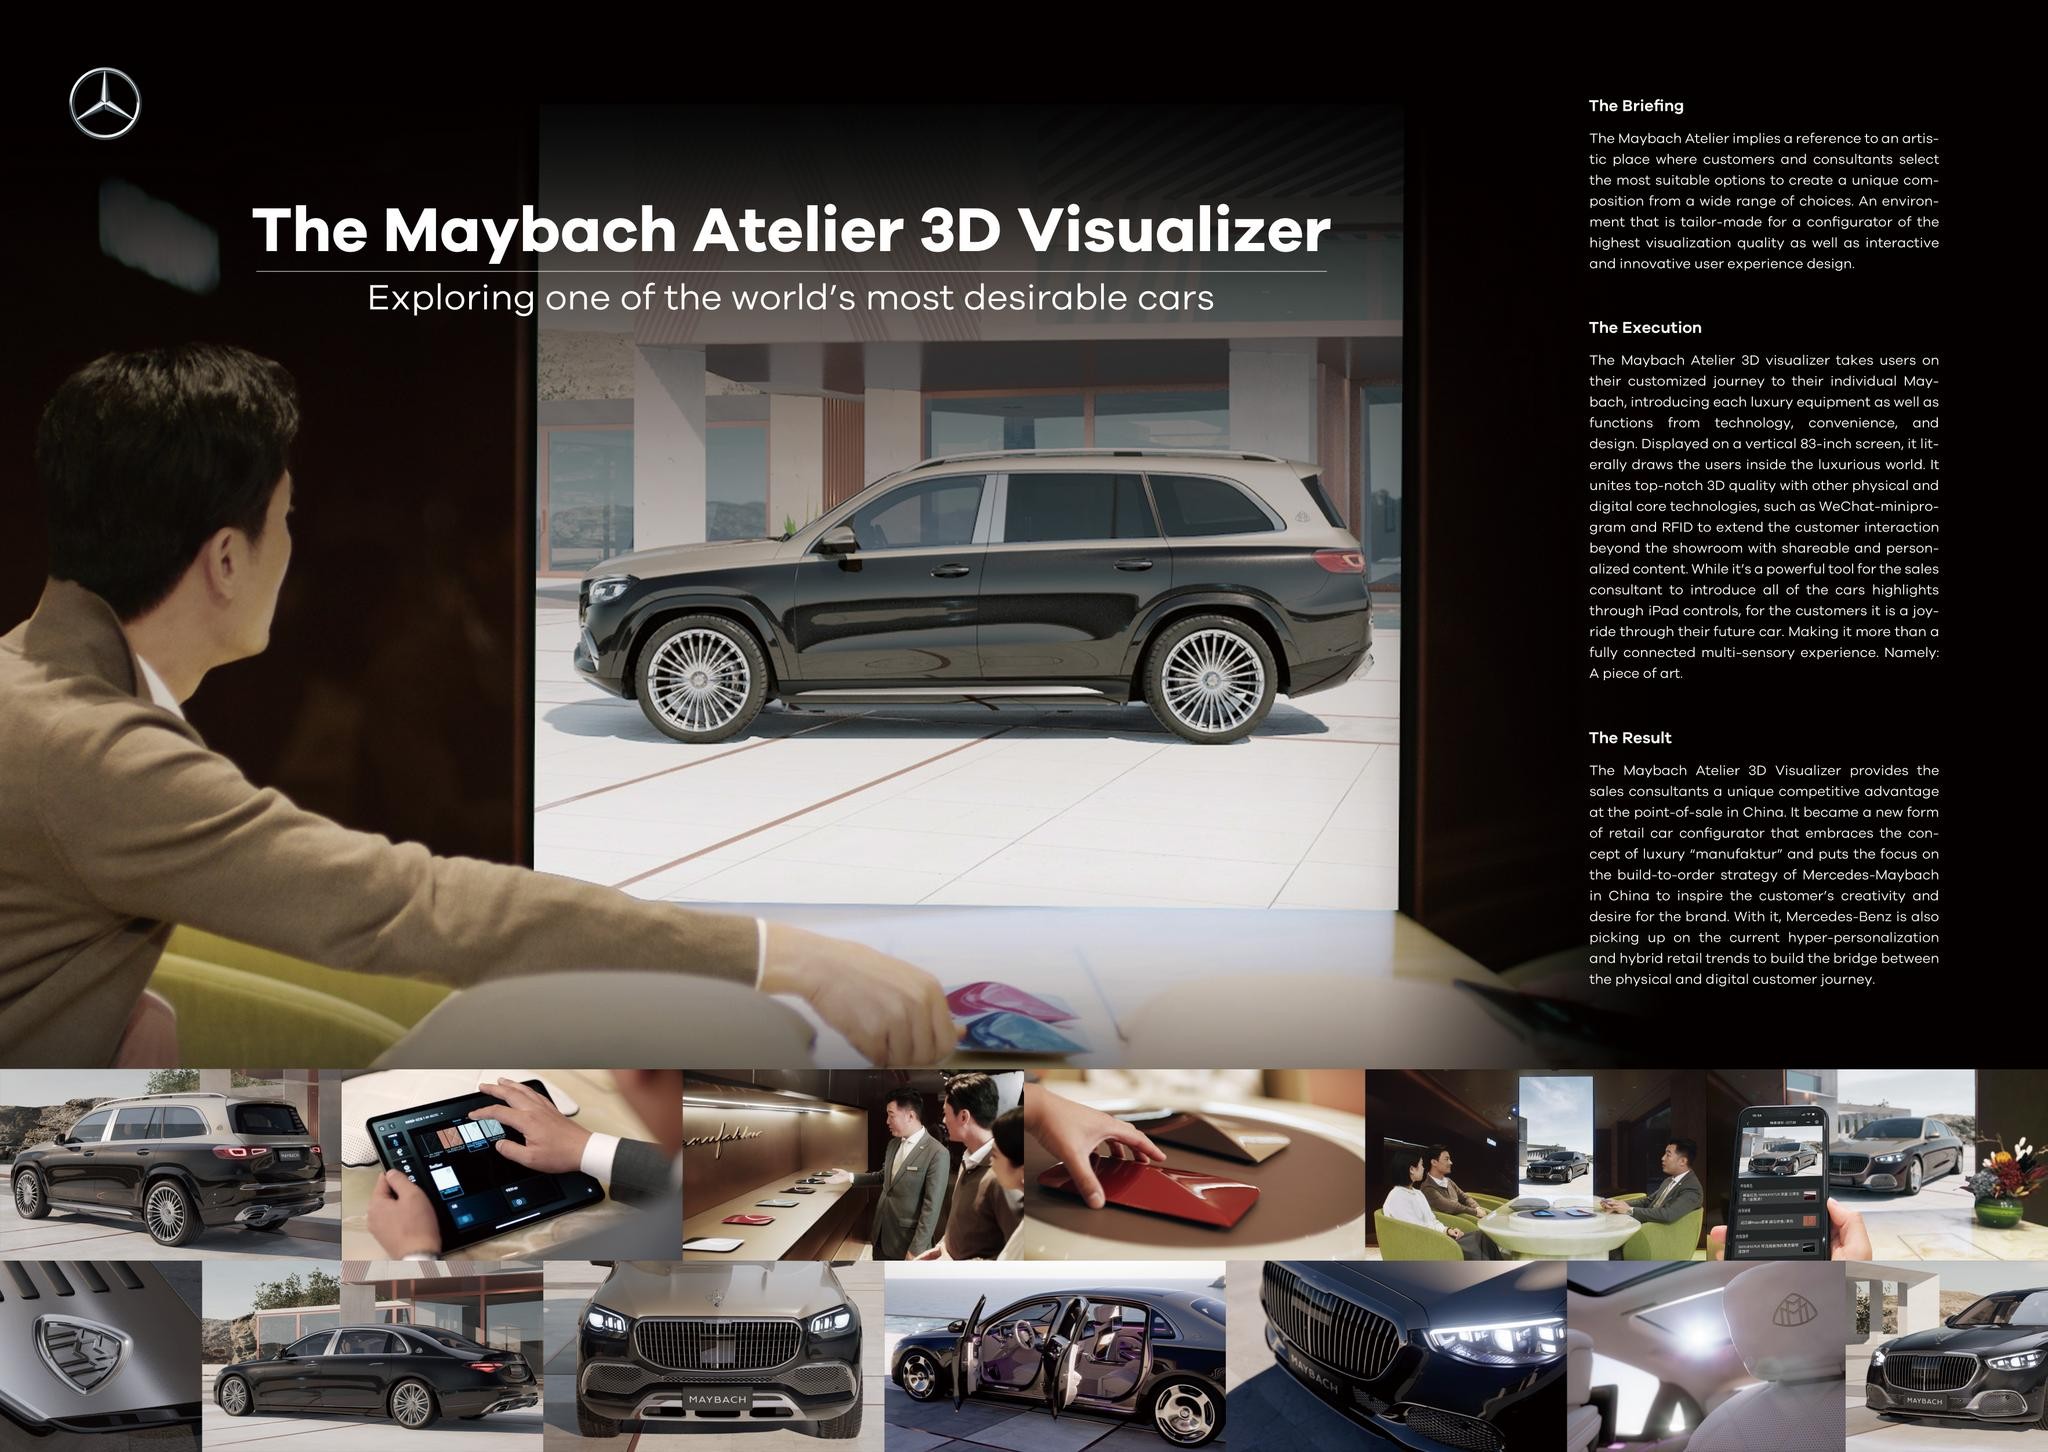 The Maybach Atelier 3D Visualizer